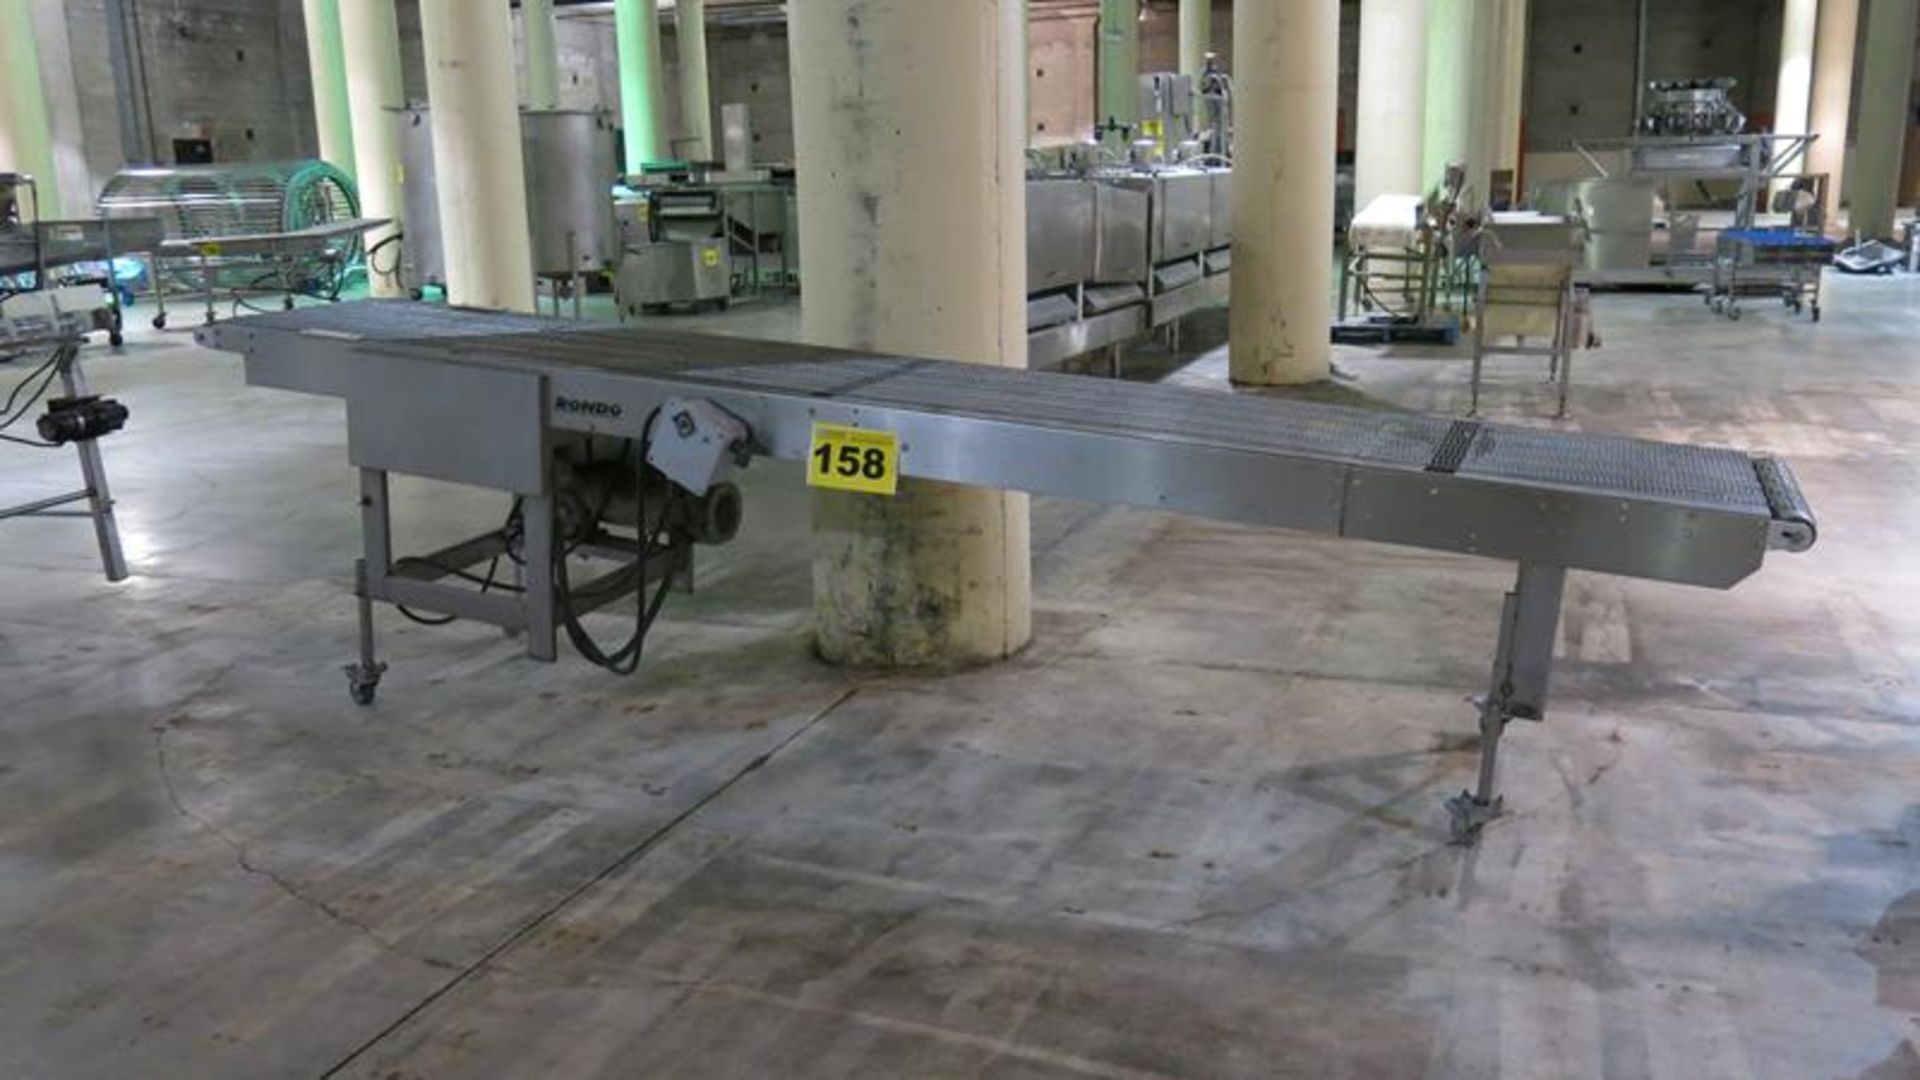 RONDO, STAINLESS STEEL, INCLINE CONVEYOR, 13' X 2', 220 VAC, 3 PHASE - Image 3 of 3